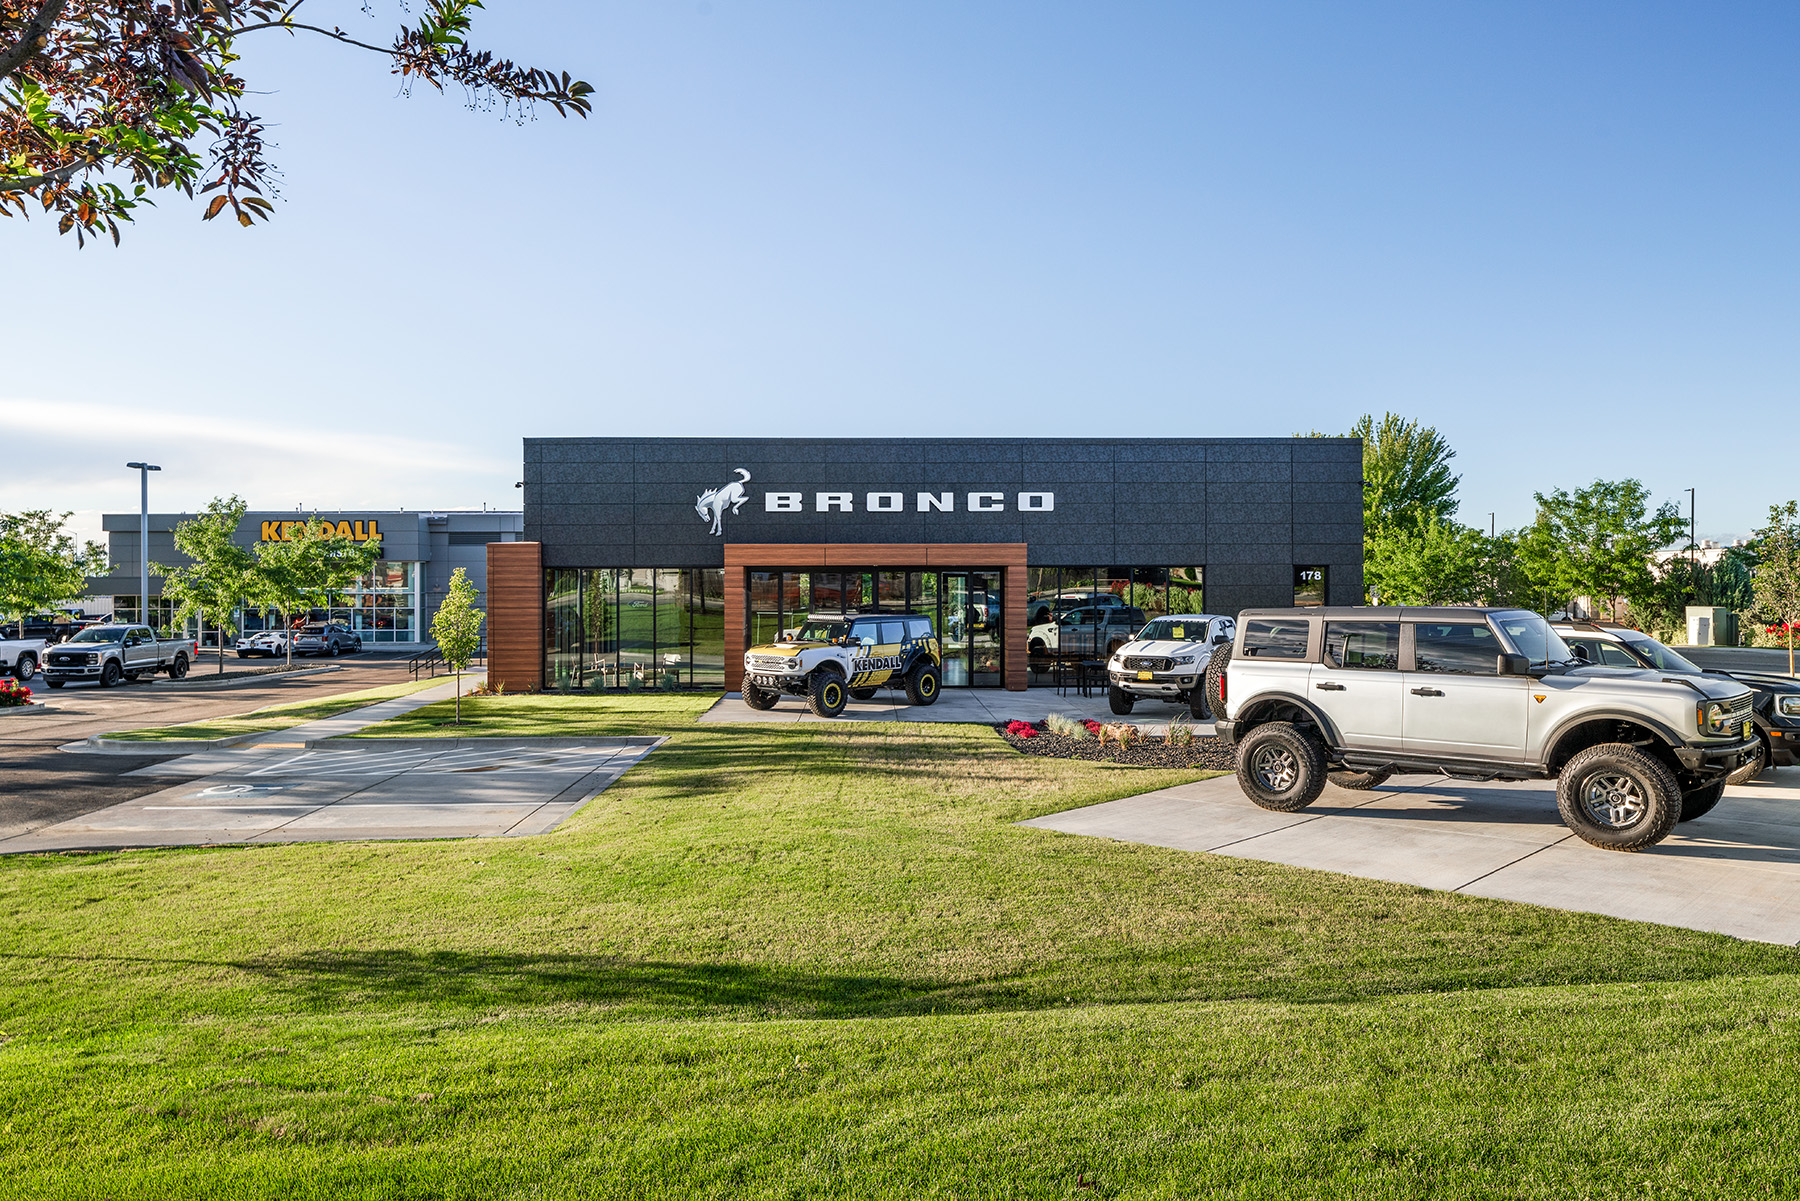 The Kendall Bronco showroom is part of the larger Kendall Ford car dealership in Meridian, Idaho.